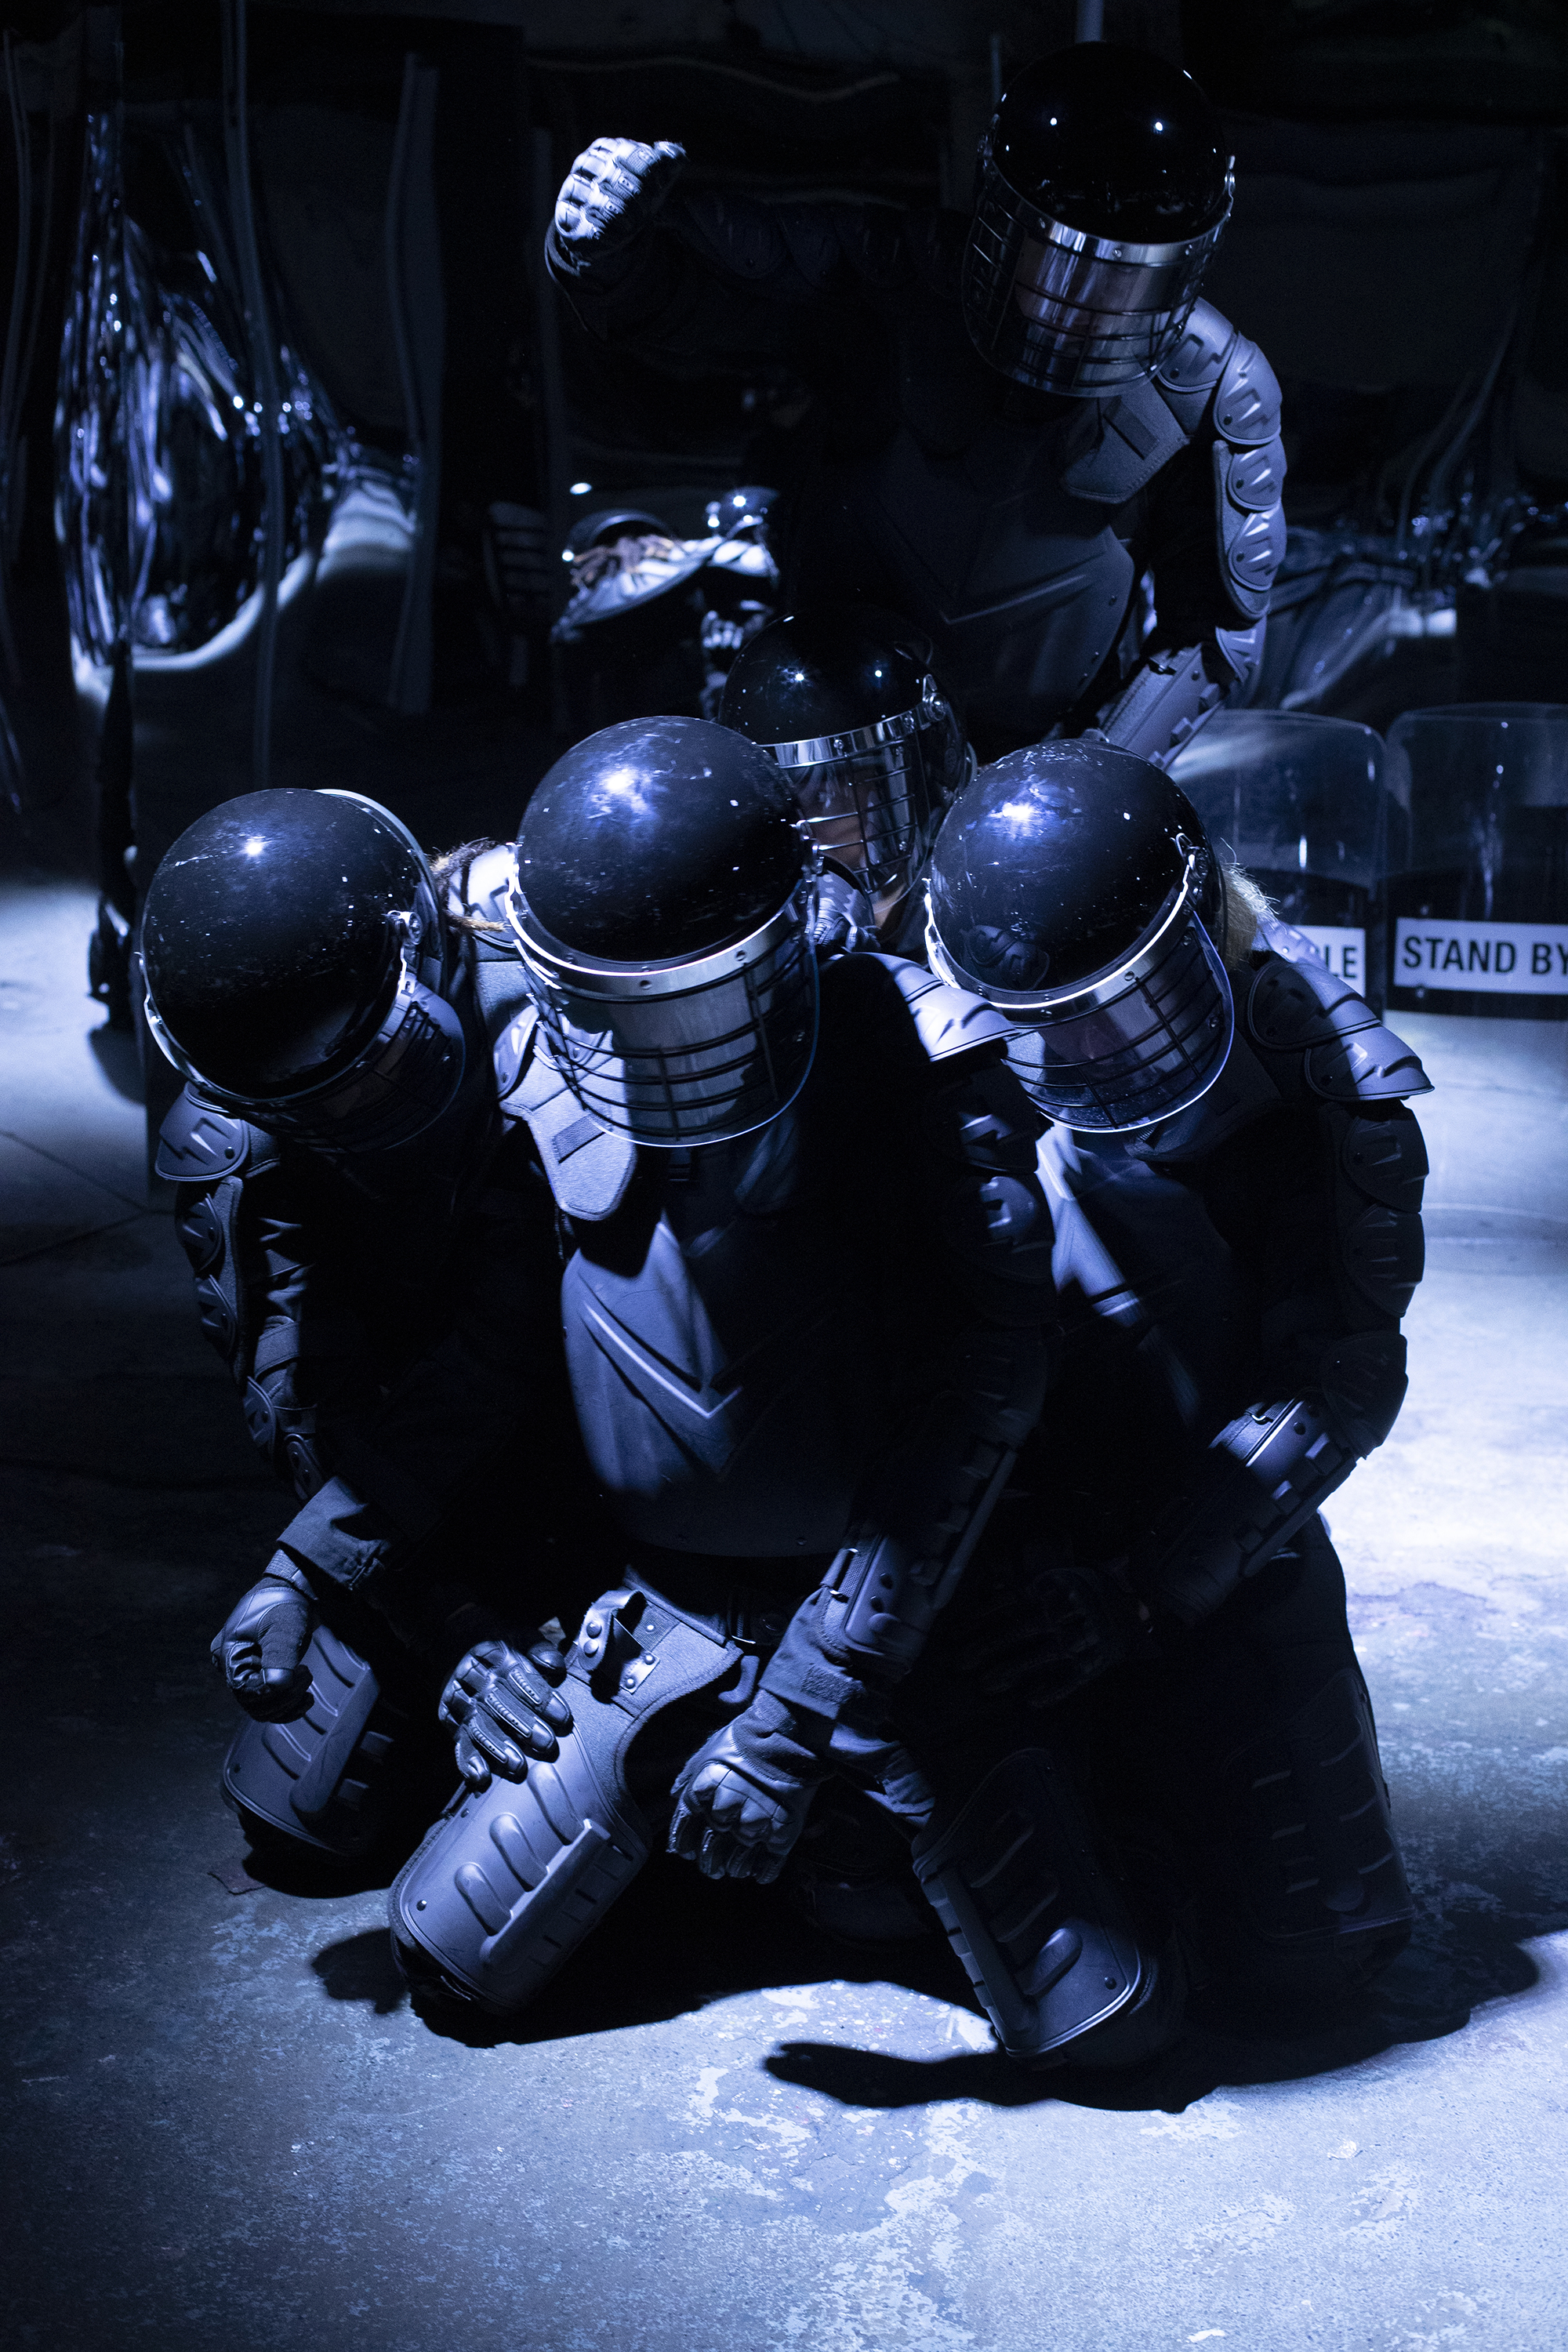 people in riot gear simulate fighting